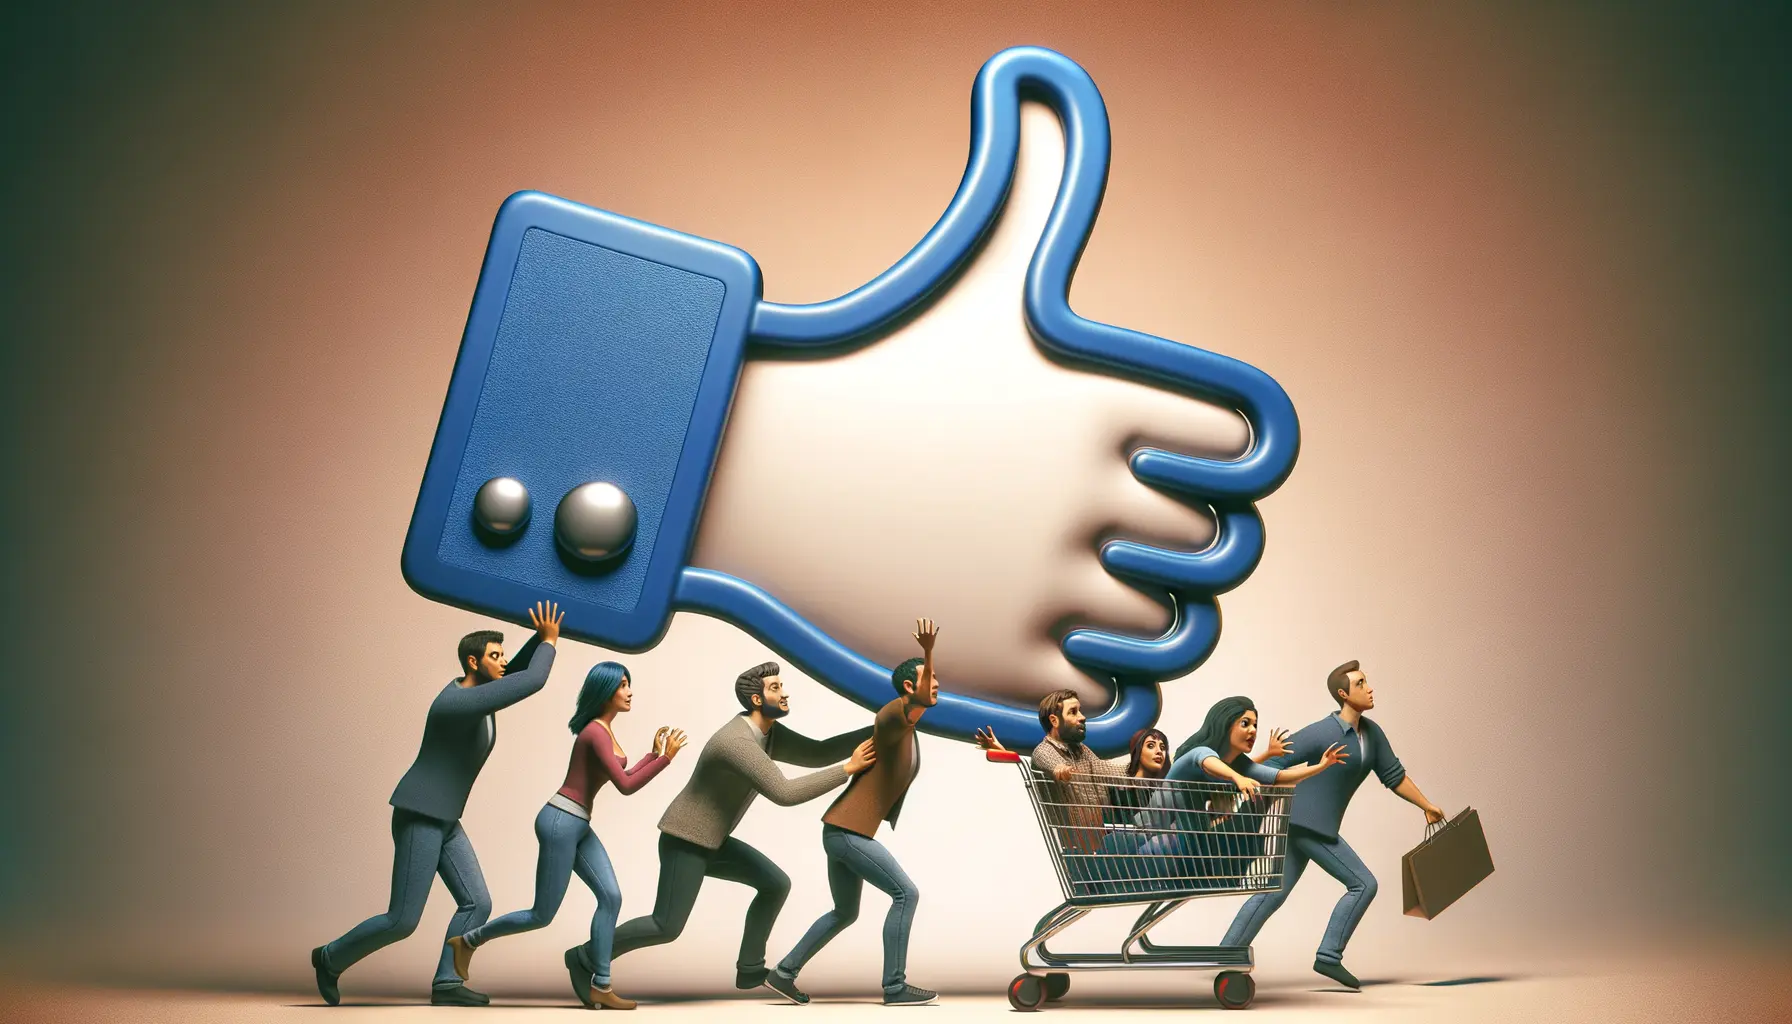 Make a graphic of the Facebook like thumbs up symbol grabbing humans and putting them in a shopping cart. make the people scared